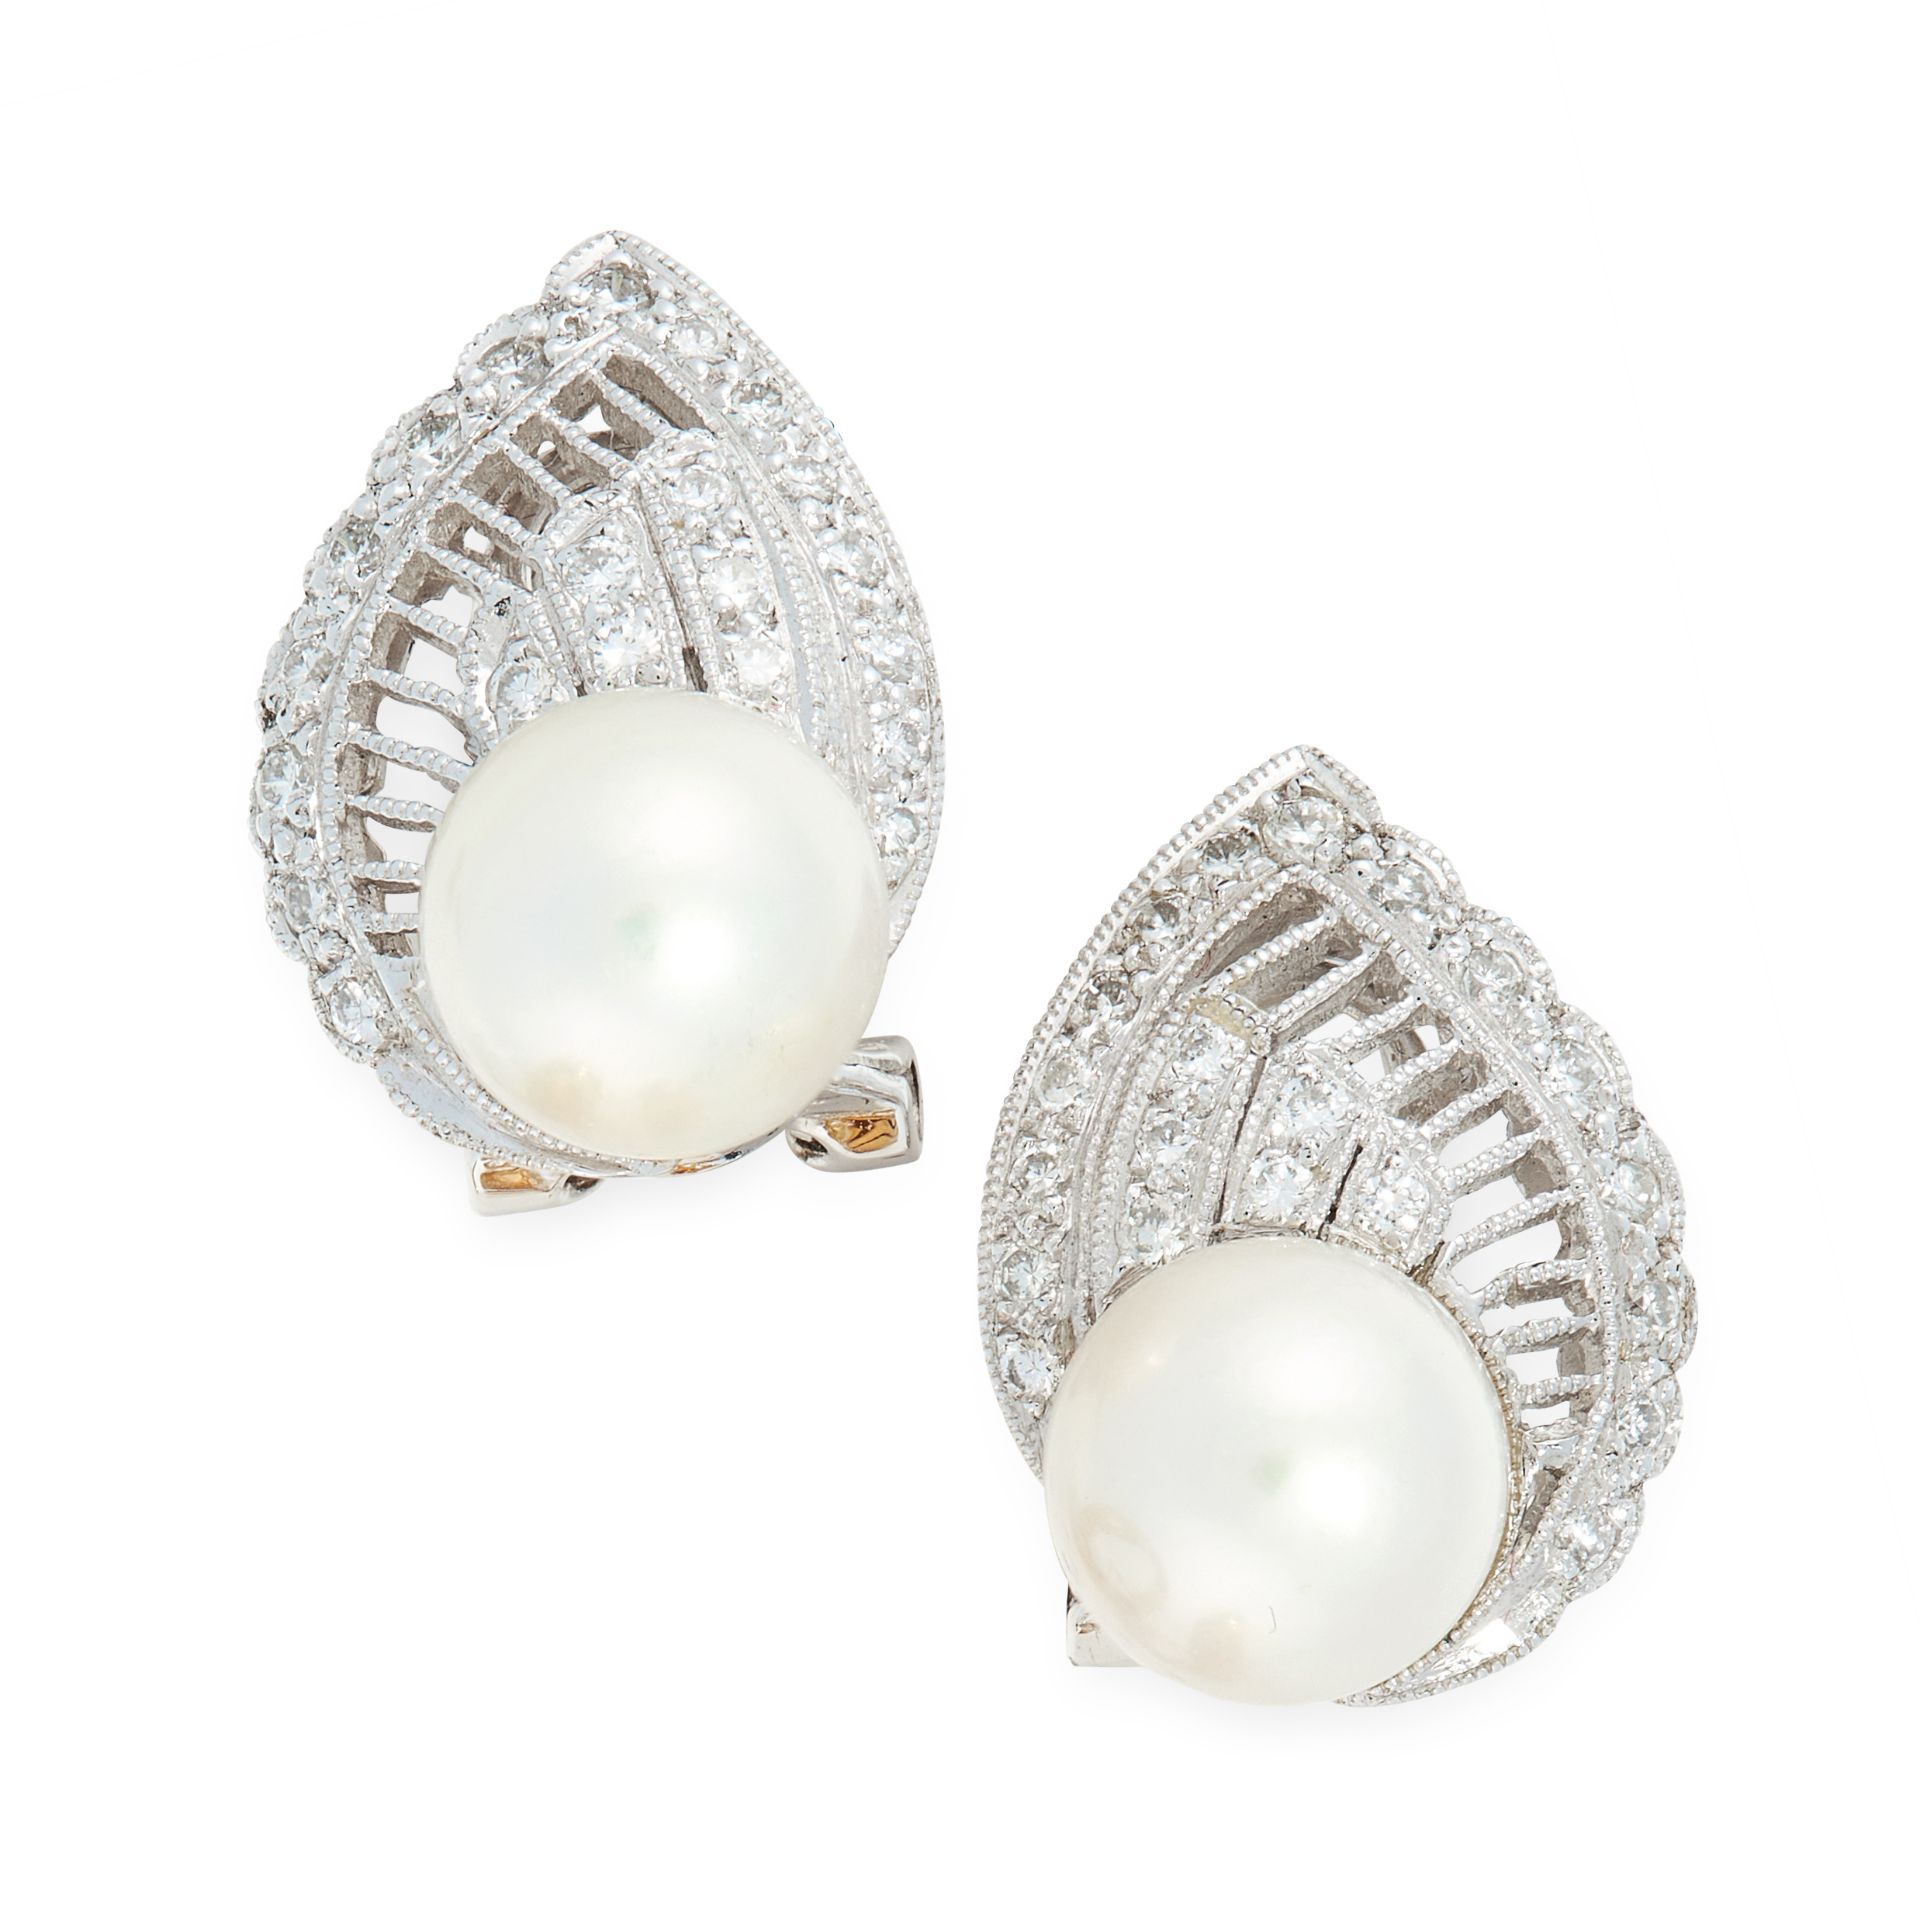 A PAIR OF PEARL AND DIAMOND EARRINGS in 18ct white gold, each set with a pearl of 8.0mm accented